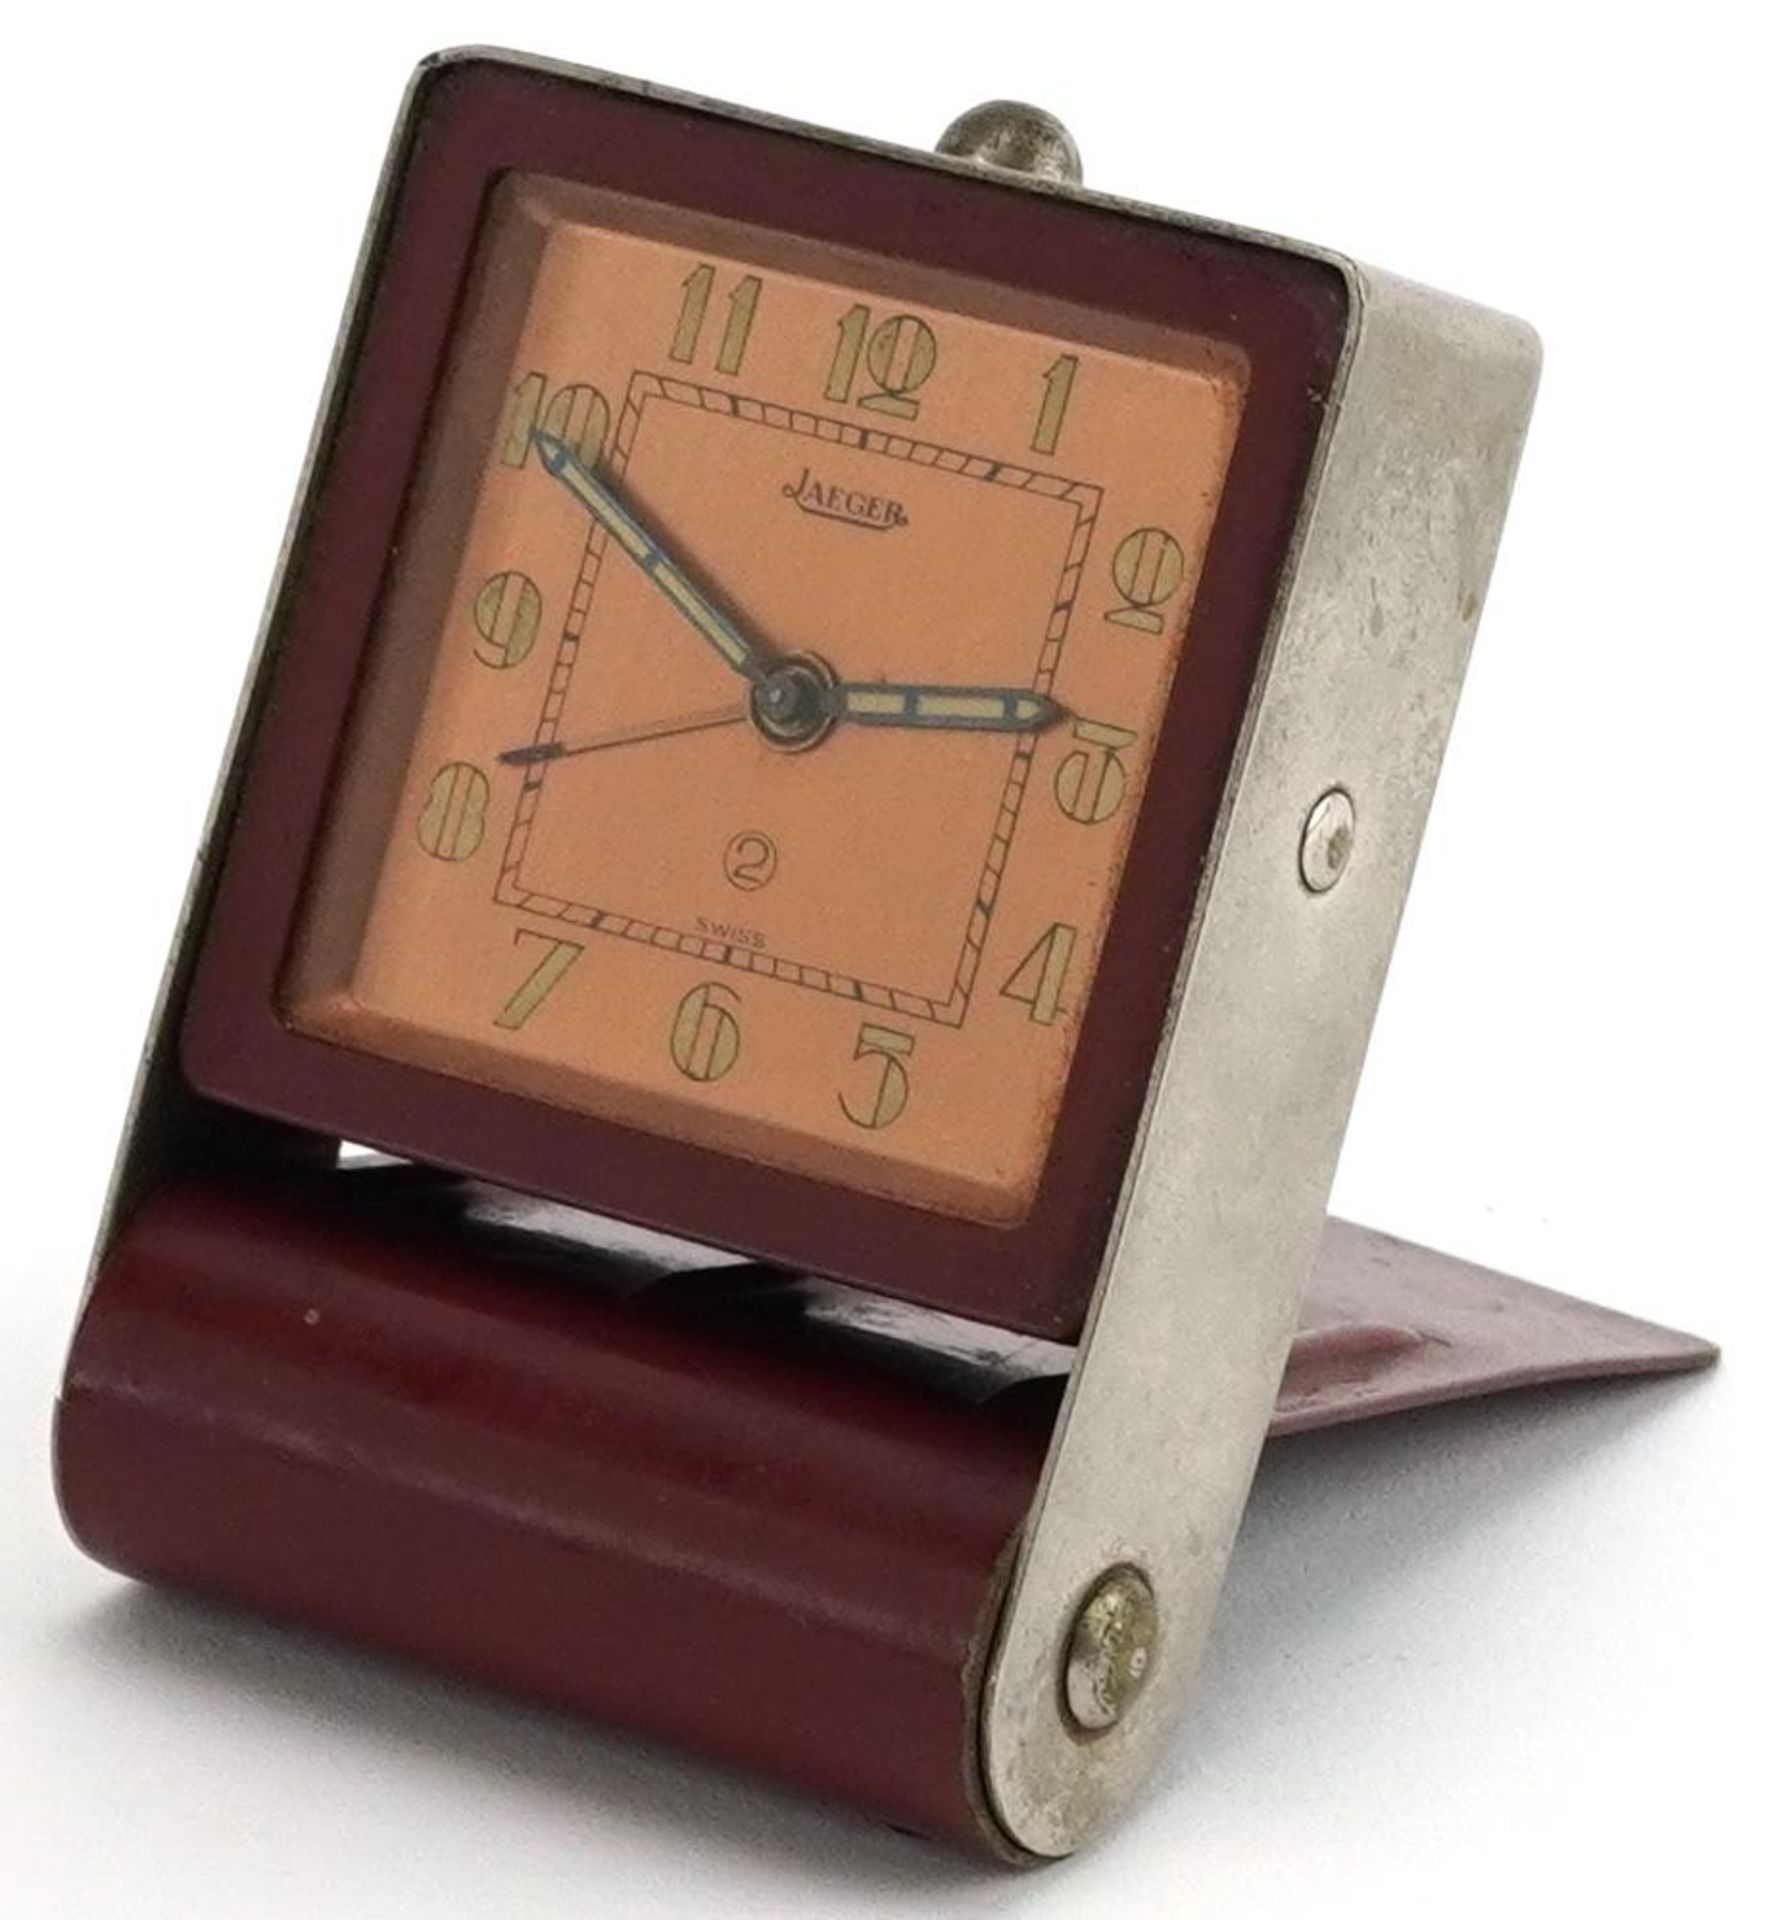 Vintage Jaeger LeCoultre travel alarm clock with square dial having Arabic numerals, 8cm high